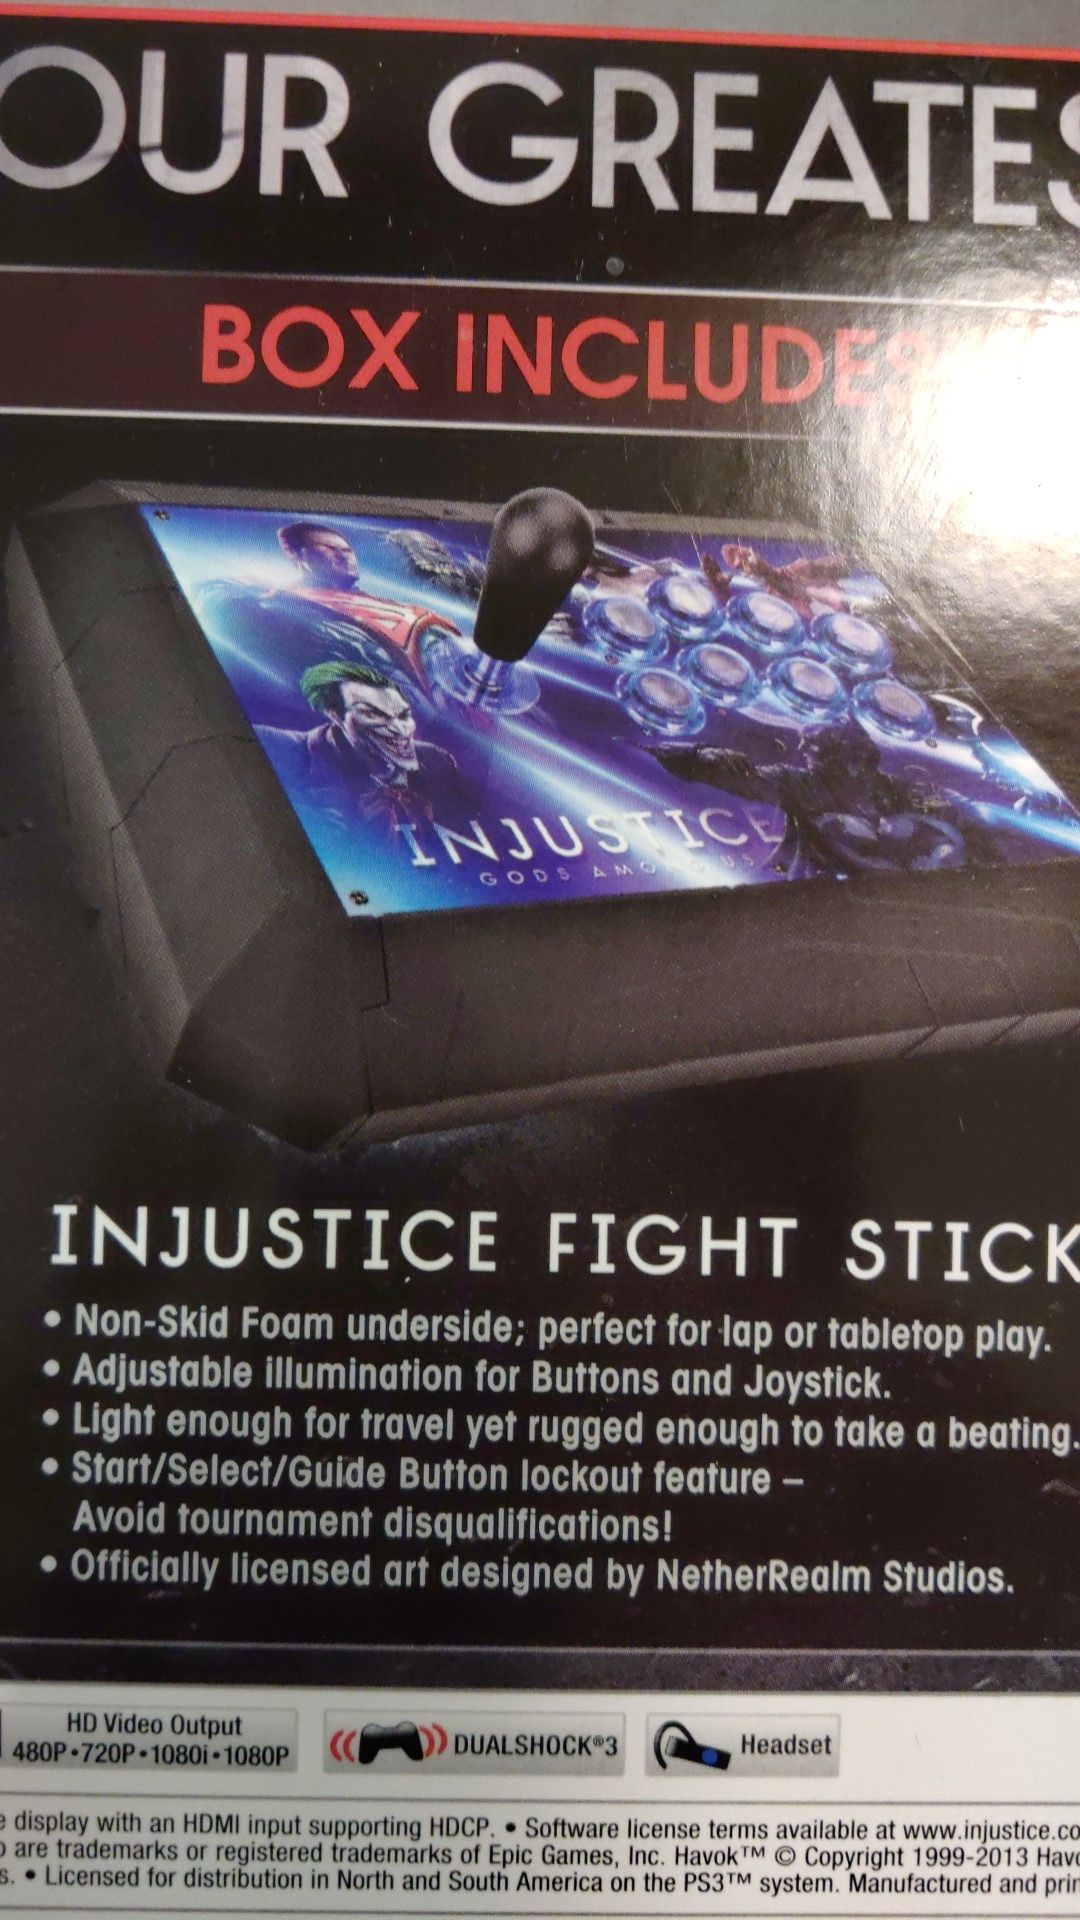 Injustice fight stick with box (no game) use as a PS3 controller on other games as well